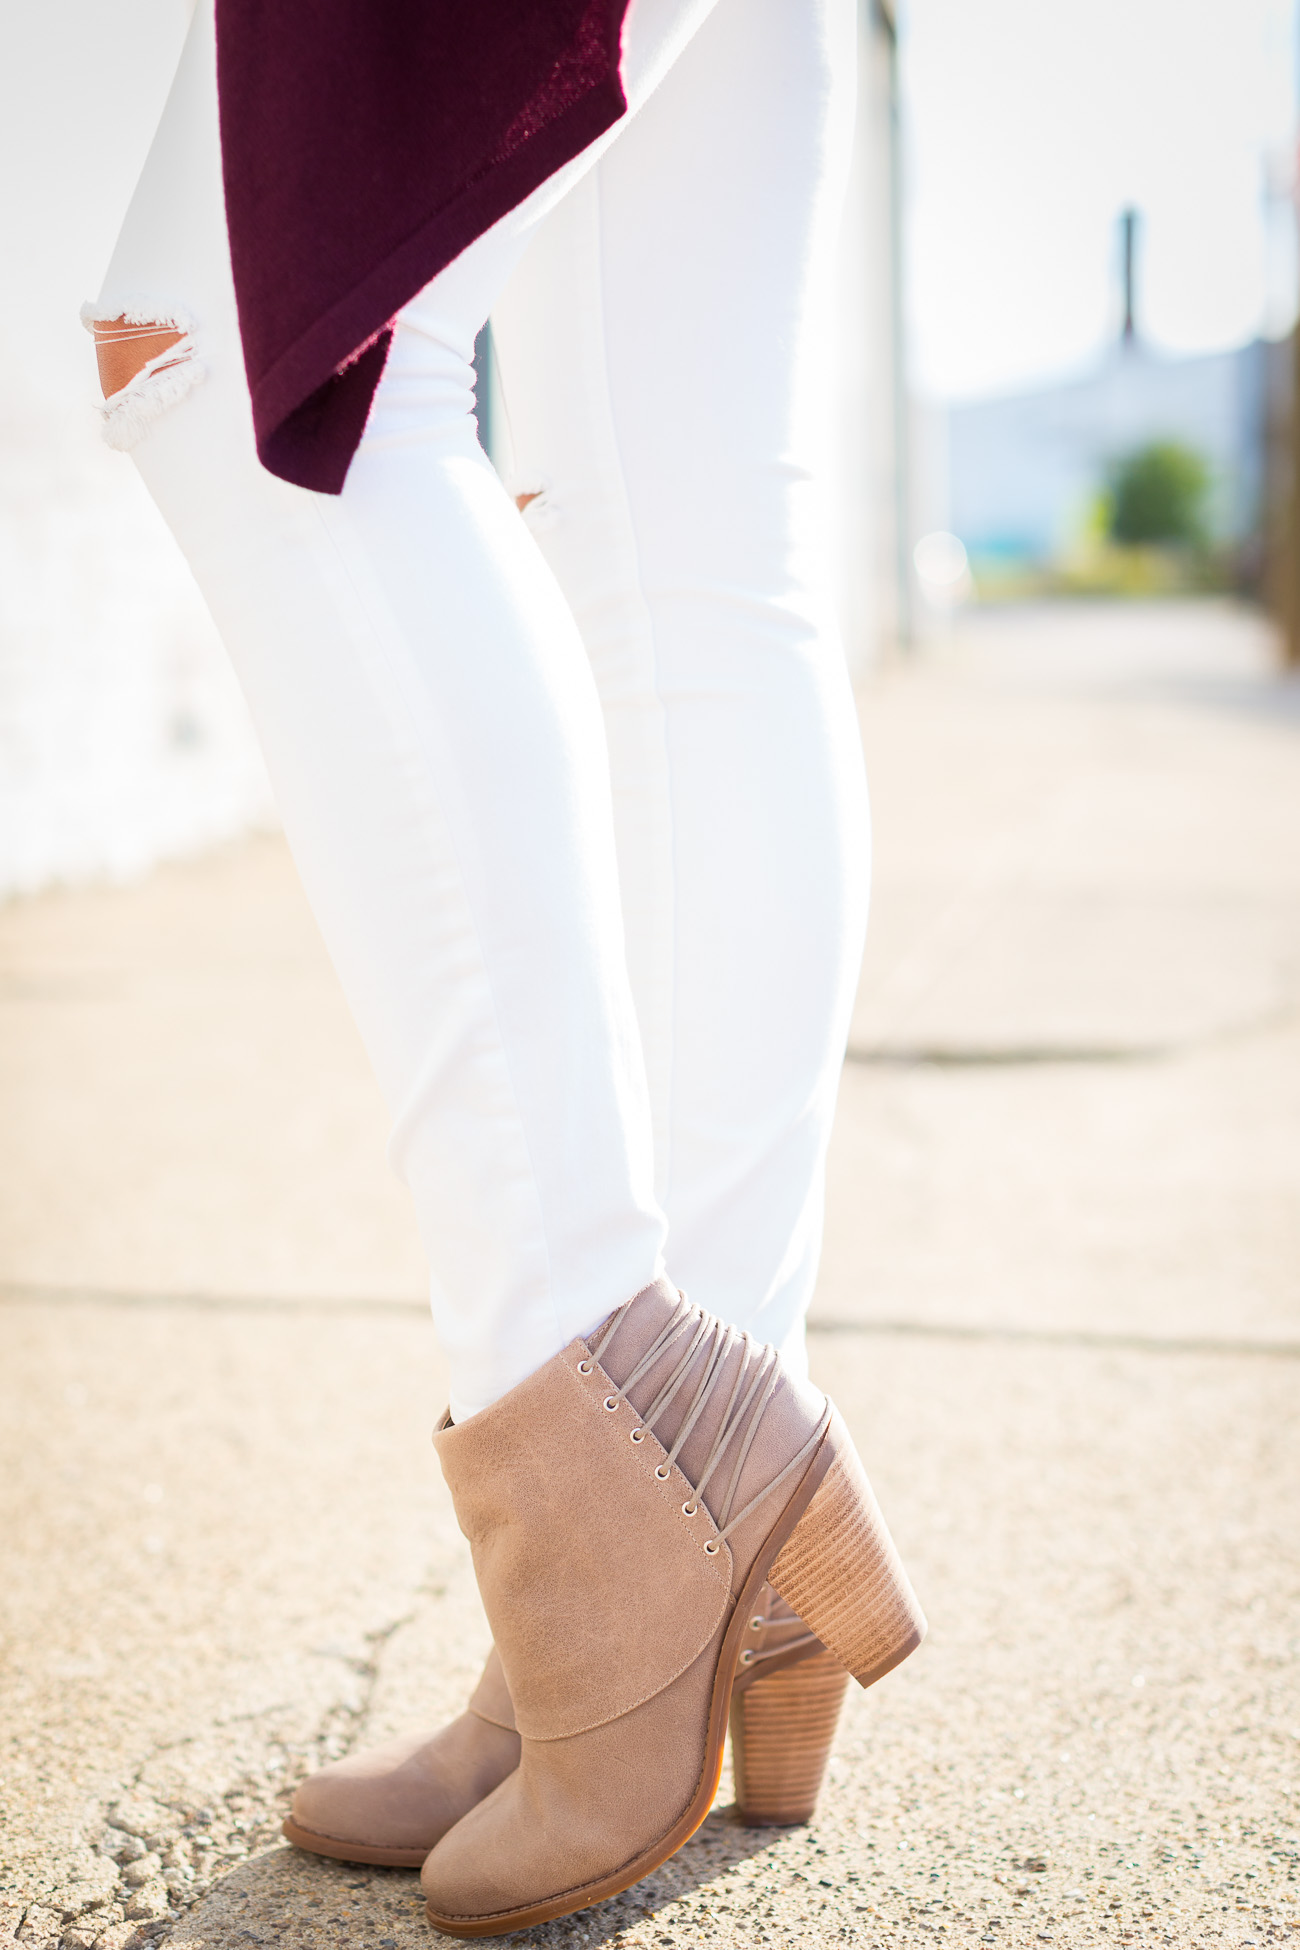 taupe booties, fall booties, cute fall booties, fall style, fall fashion, fall style inspiration, a southern drawl fall outfits, cute fall outfits, preppy fall outfits, southern fashion blogger // grace wainwright a southern drawl